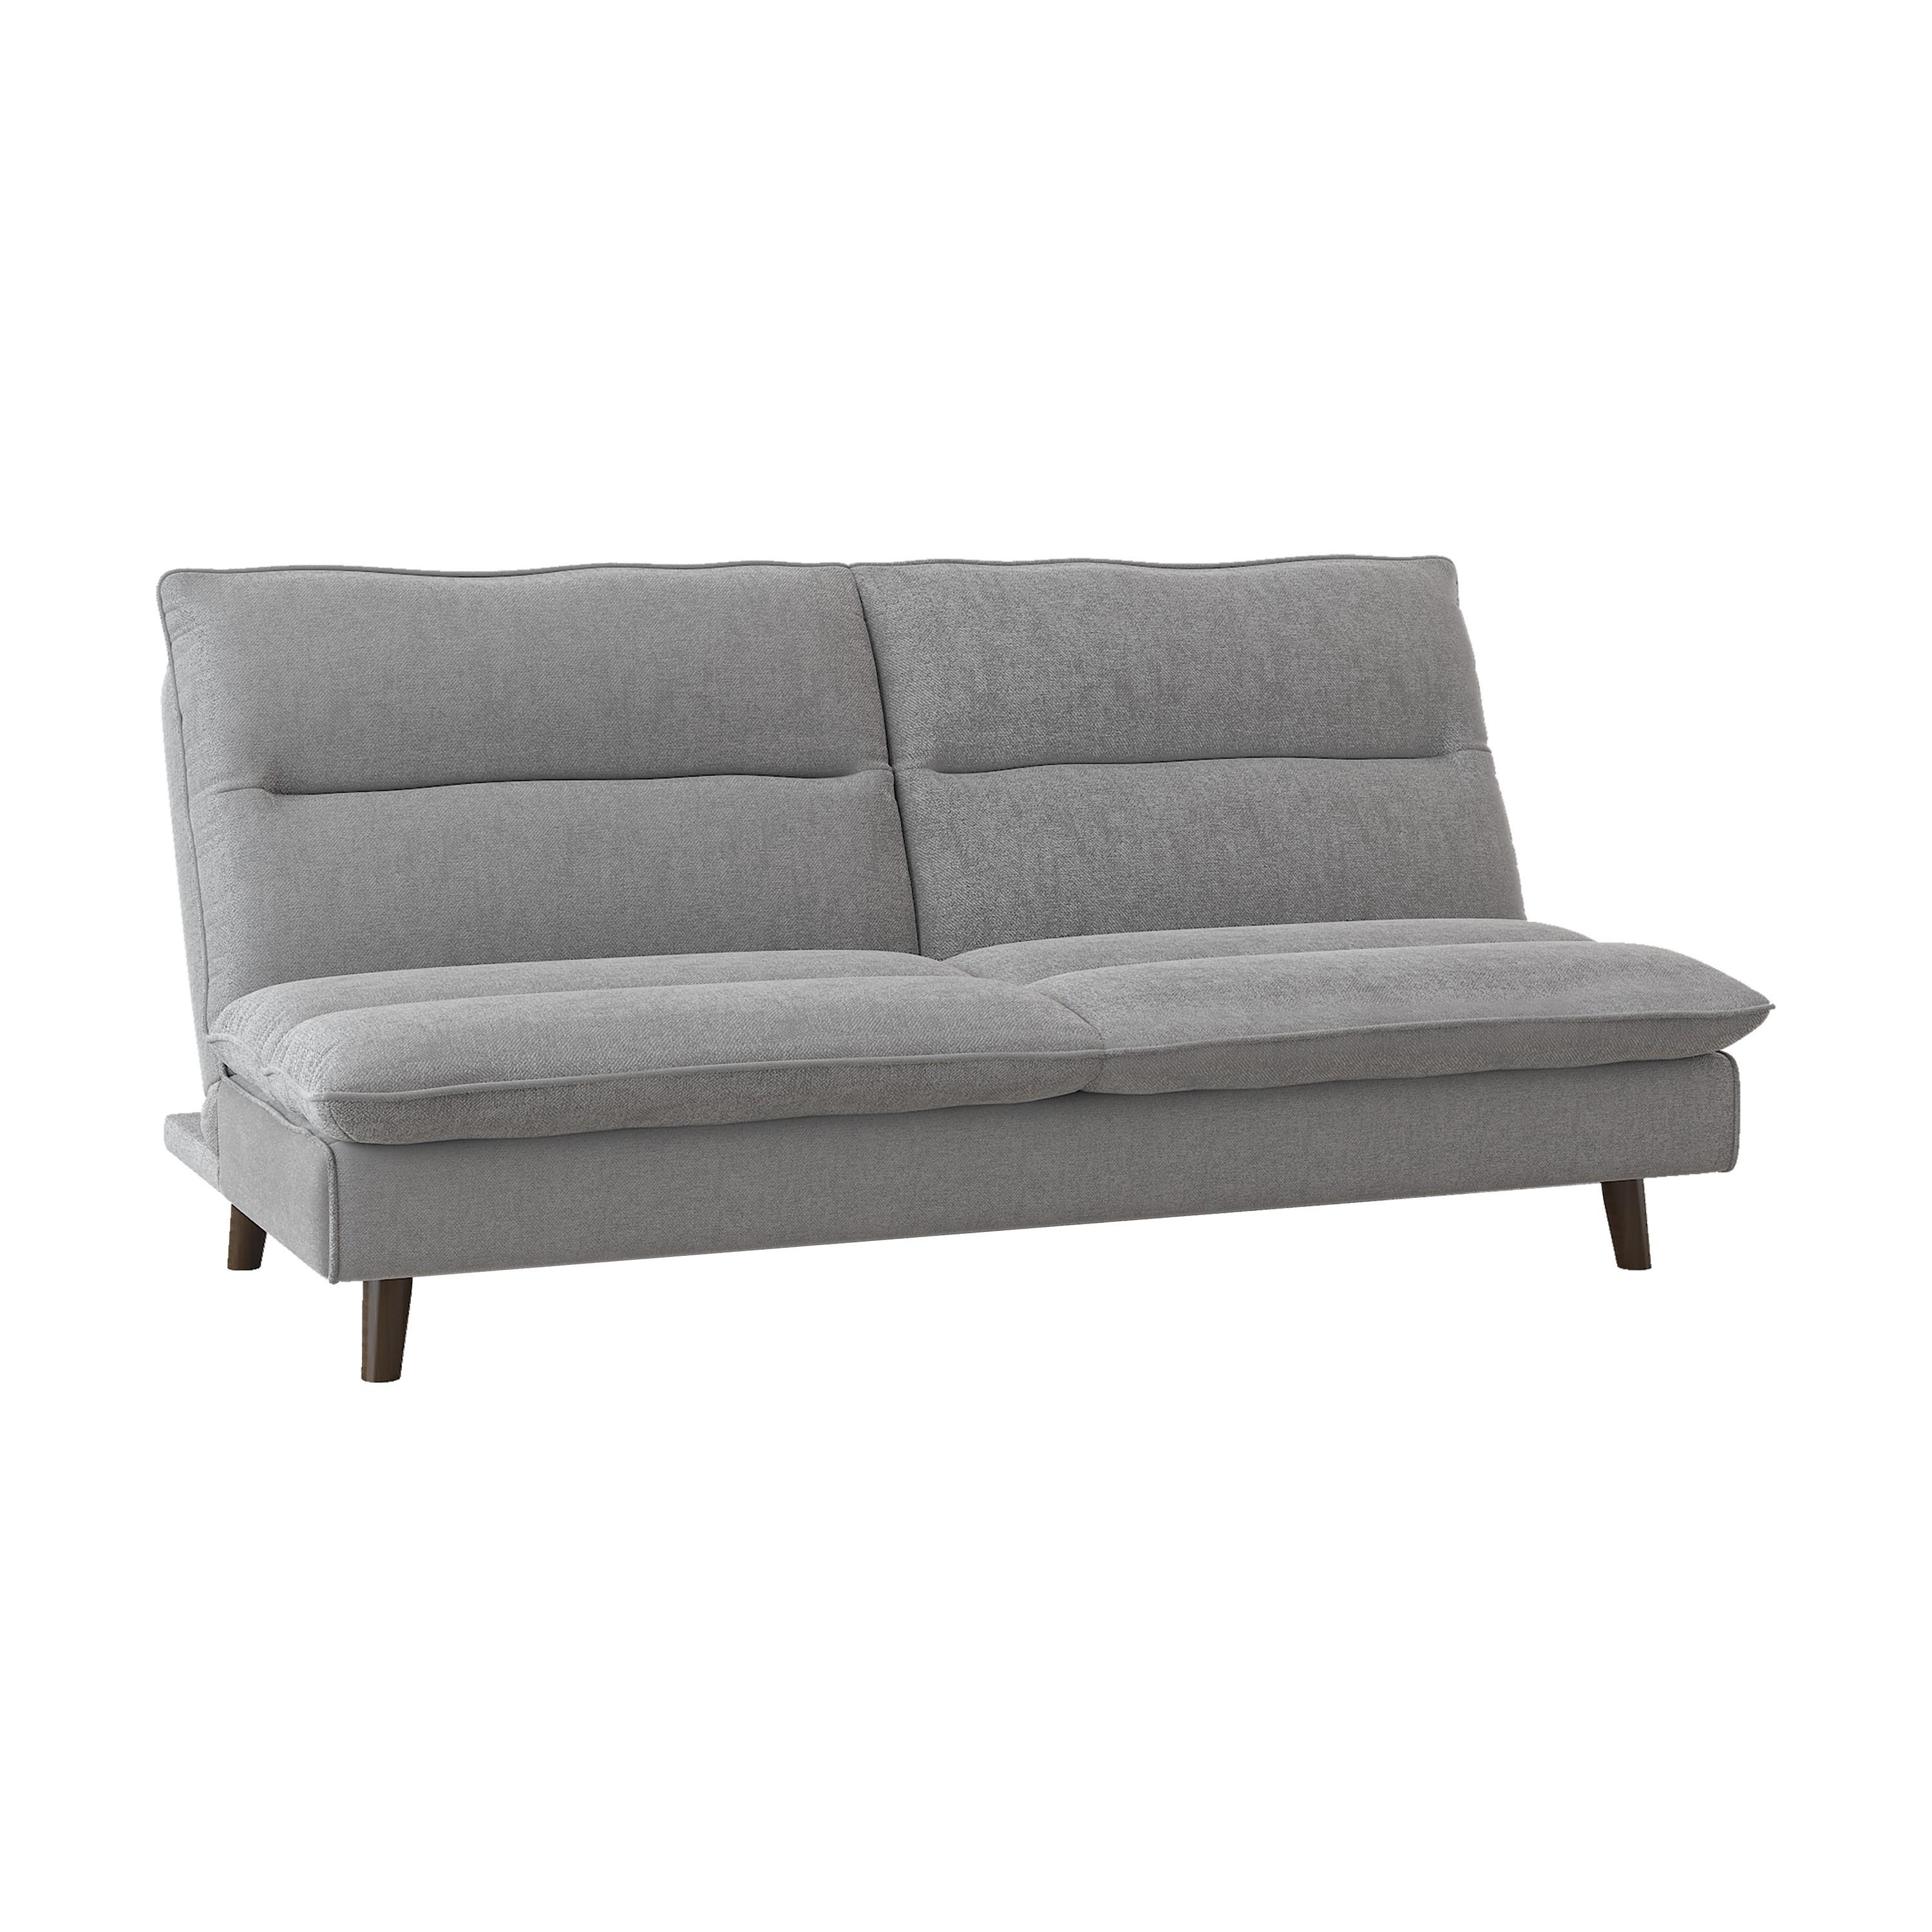 Casual Lounger 9560GY-3CL Mackay 9560GY-3CL in Light Gray Polyester